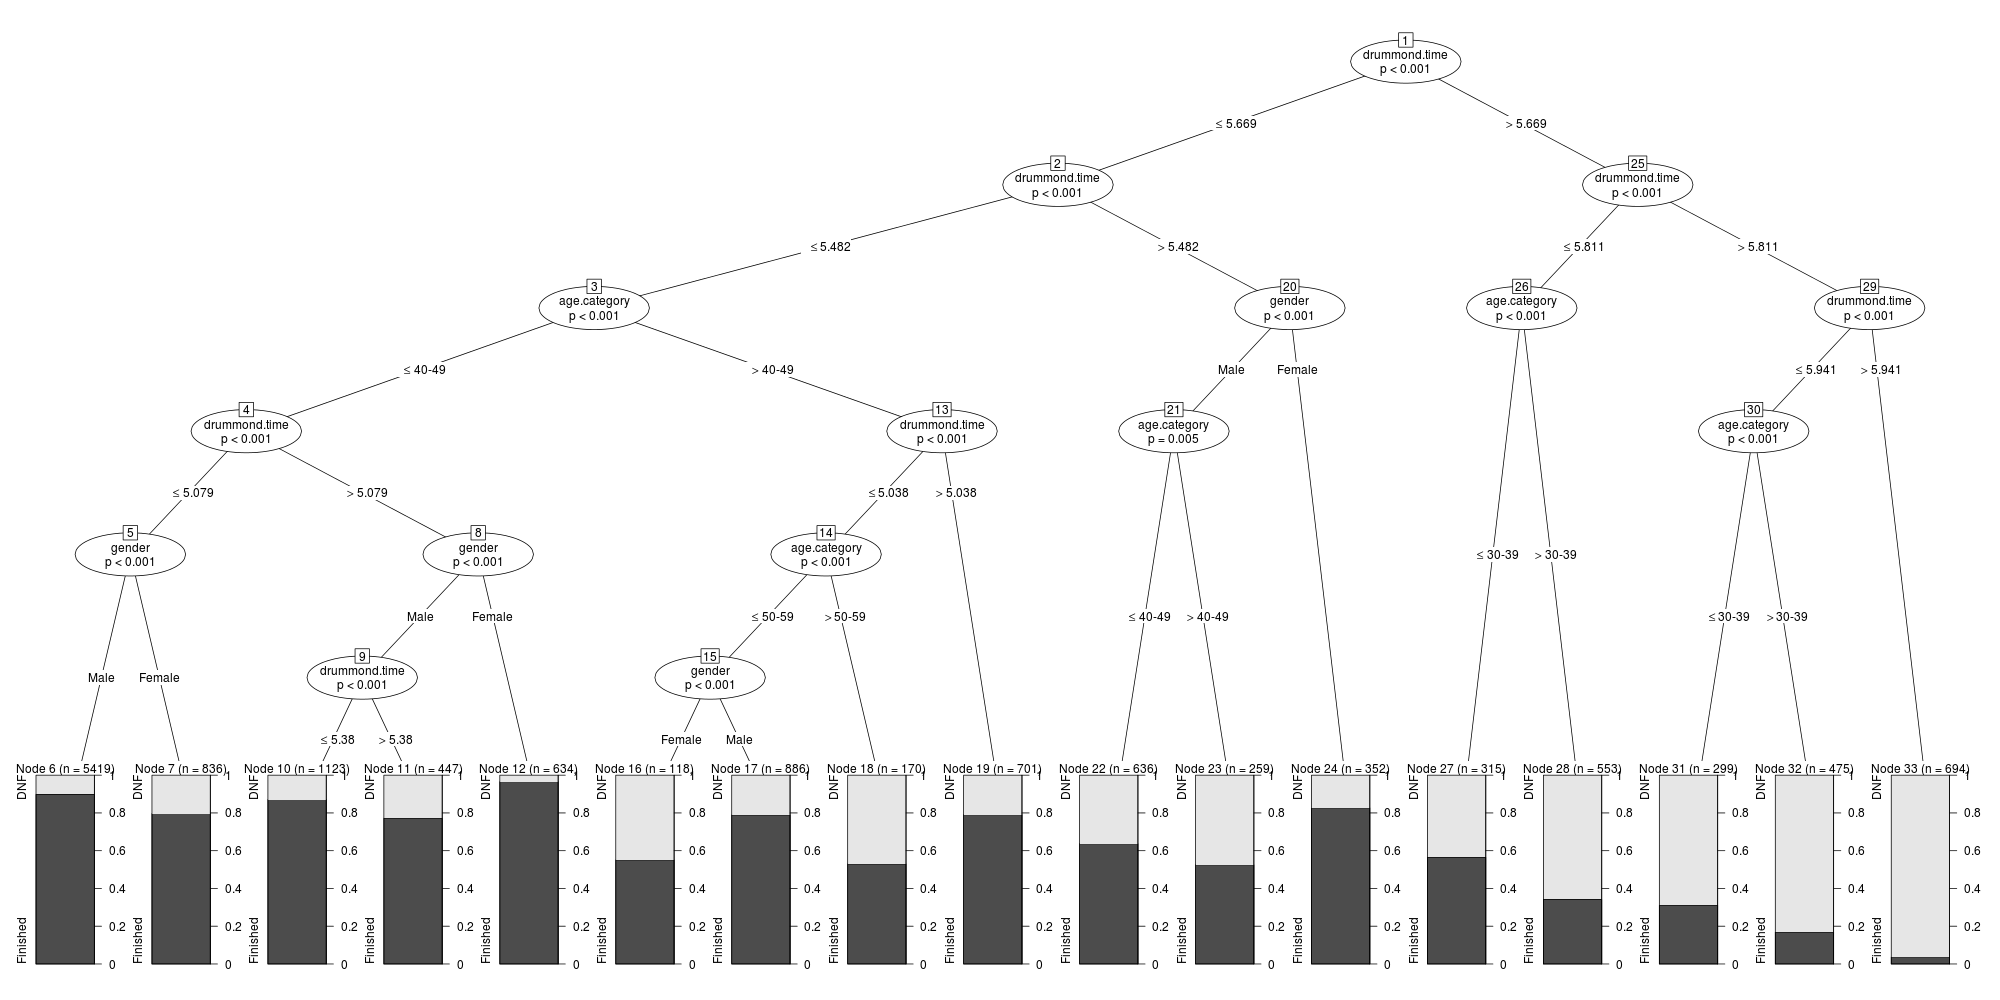 A Conditional Inference Tree for predicting whether or not a runner will finish the Comrades Marathon based on various demographic features and their time at the half-way mark.